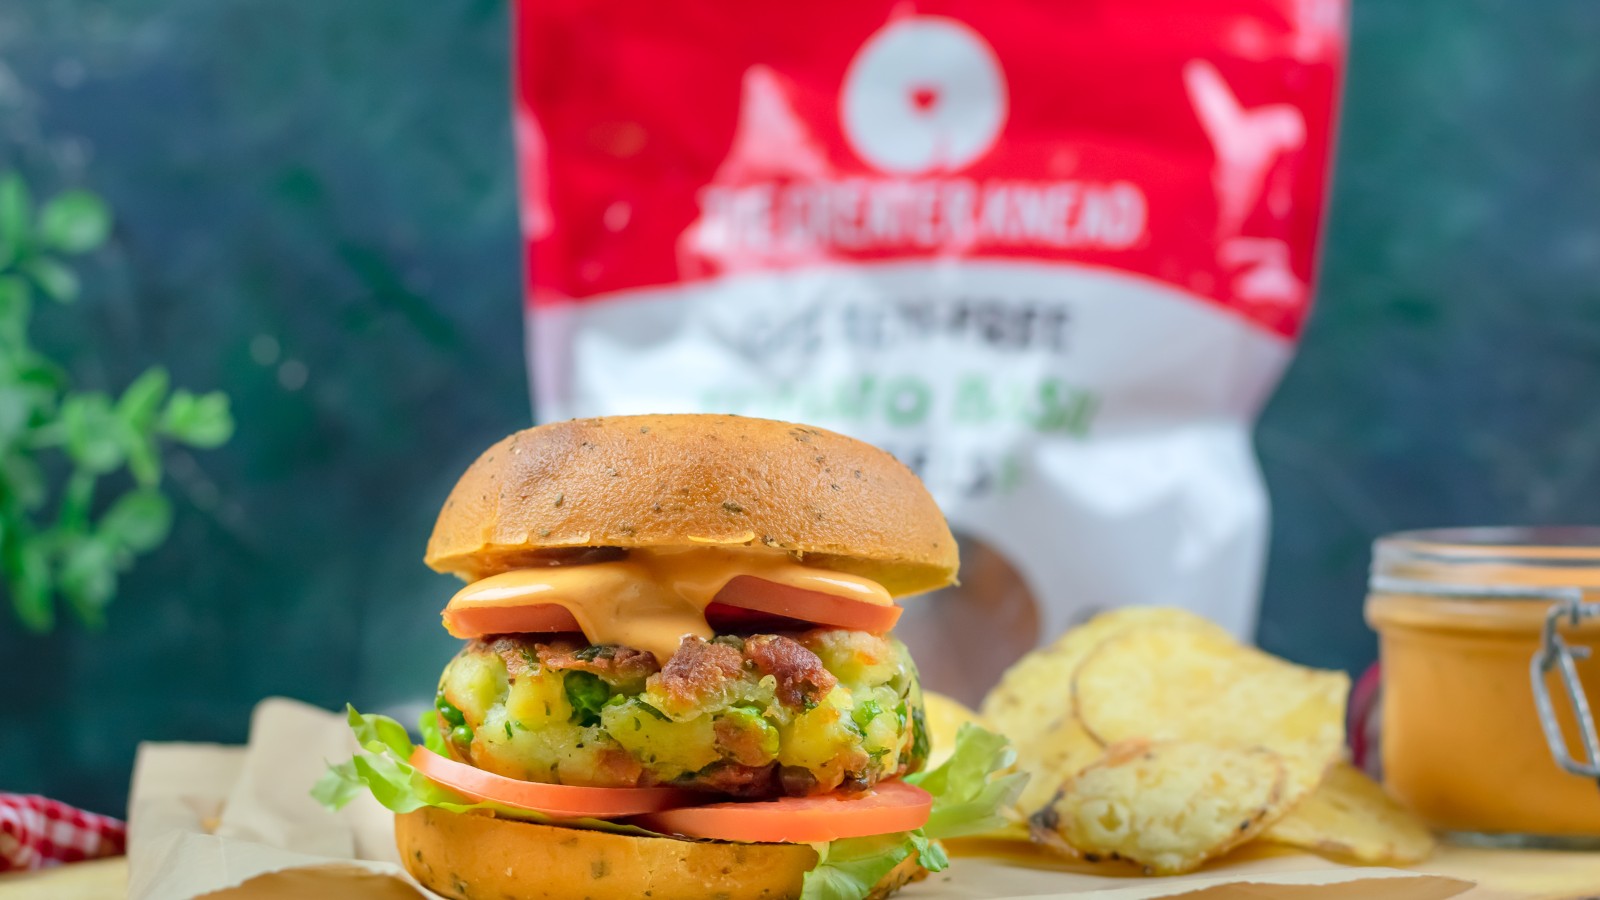 Image of Gluten Free Veggie Burger on Bagel with Creamy Chipotle Sauce